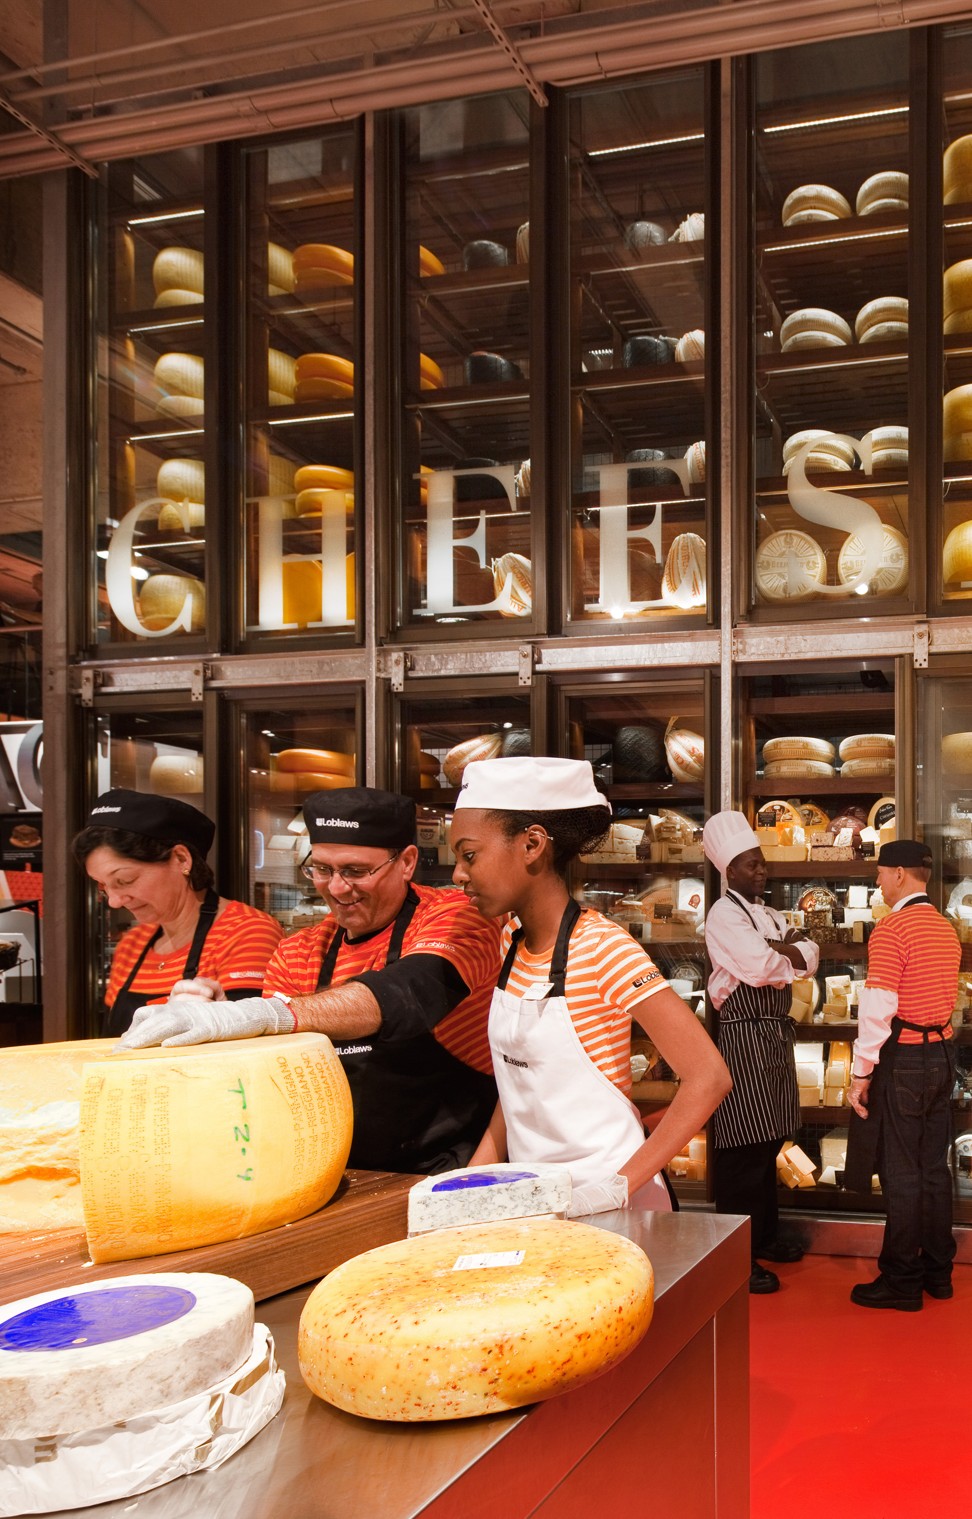 Designed by Landini Associates, Loblaws Maple Leaf Gardens, Toronto, Canada, is still visited by retailers from all over the world as the benchmark in supermarket design. The cheese wall at Loblaws is the tallest in the world. Photo: Trevor Main, courtesy of Landini Associates